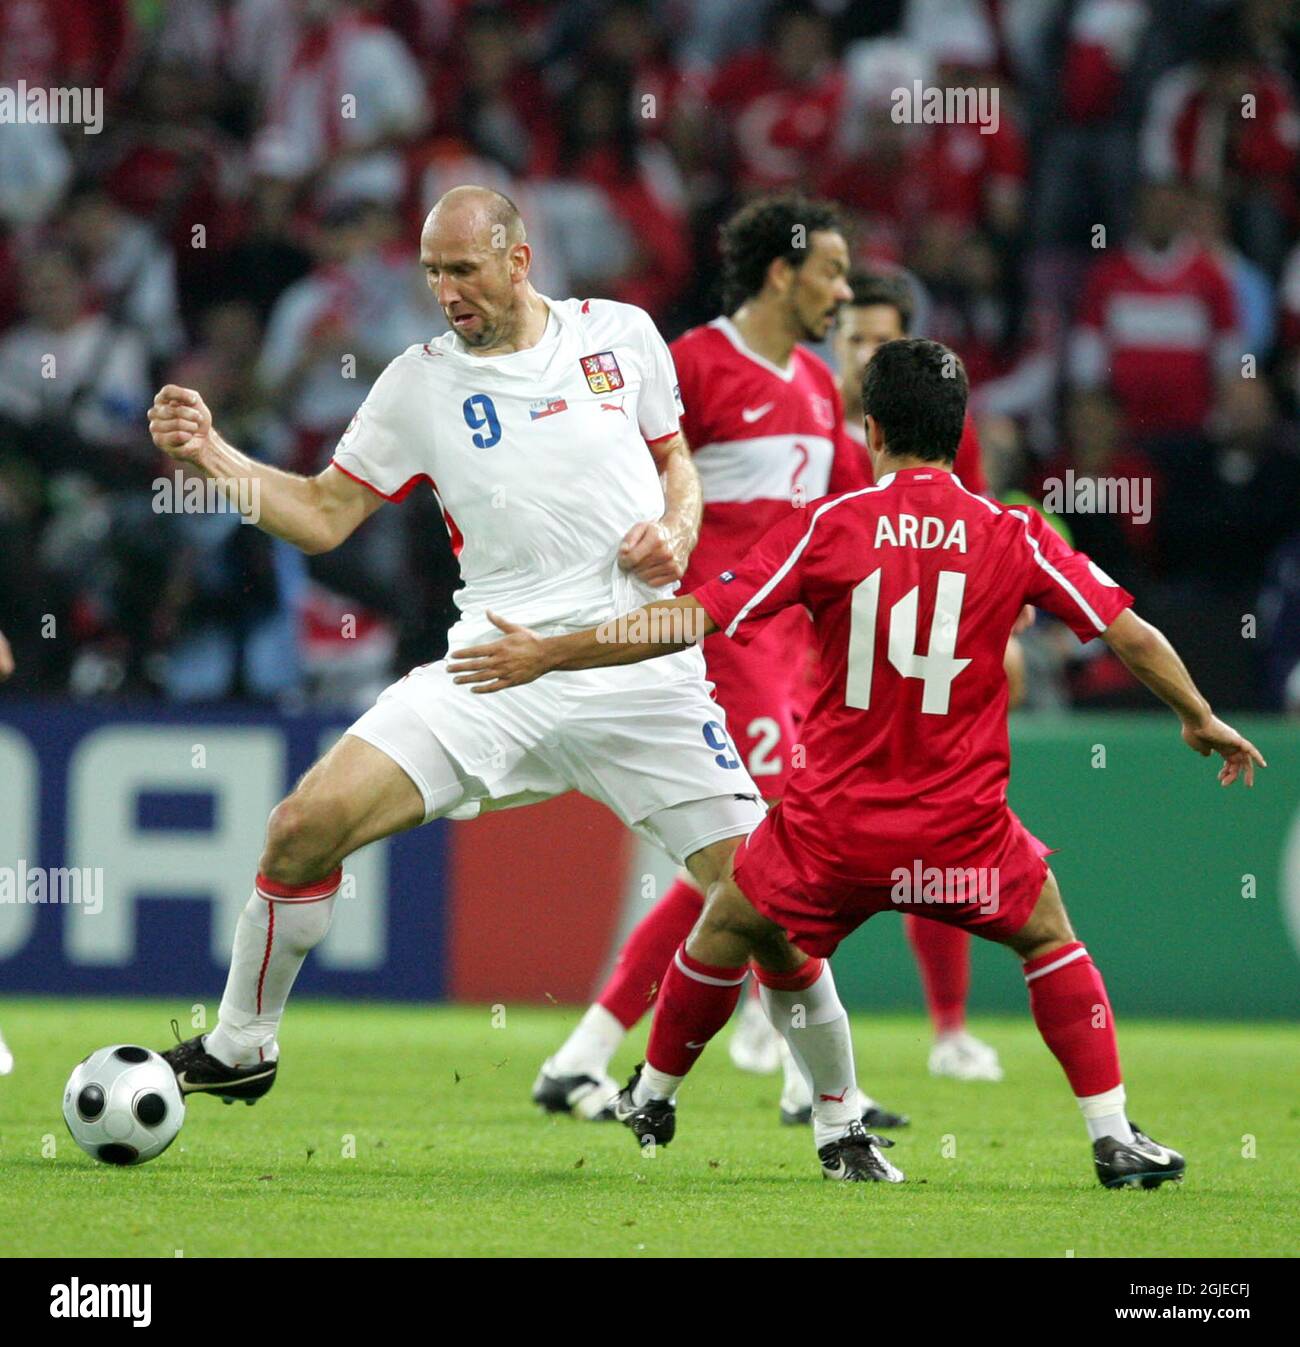 Turkey's Arda TURAN and Czech Republic Jan KOLLER (L) during the group A match between Turkey and Czech Republic at Stade de Geneve Stadium in Geneva, Switzerland at the Euro 2008 European Soccer Championships in Austria and Switzerland. Stock Photo